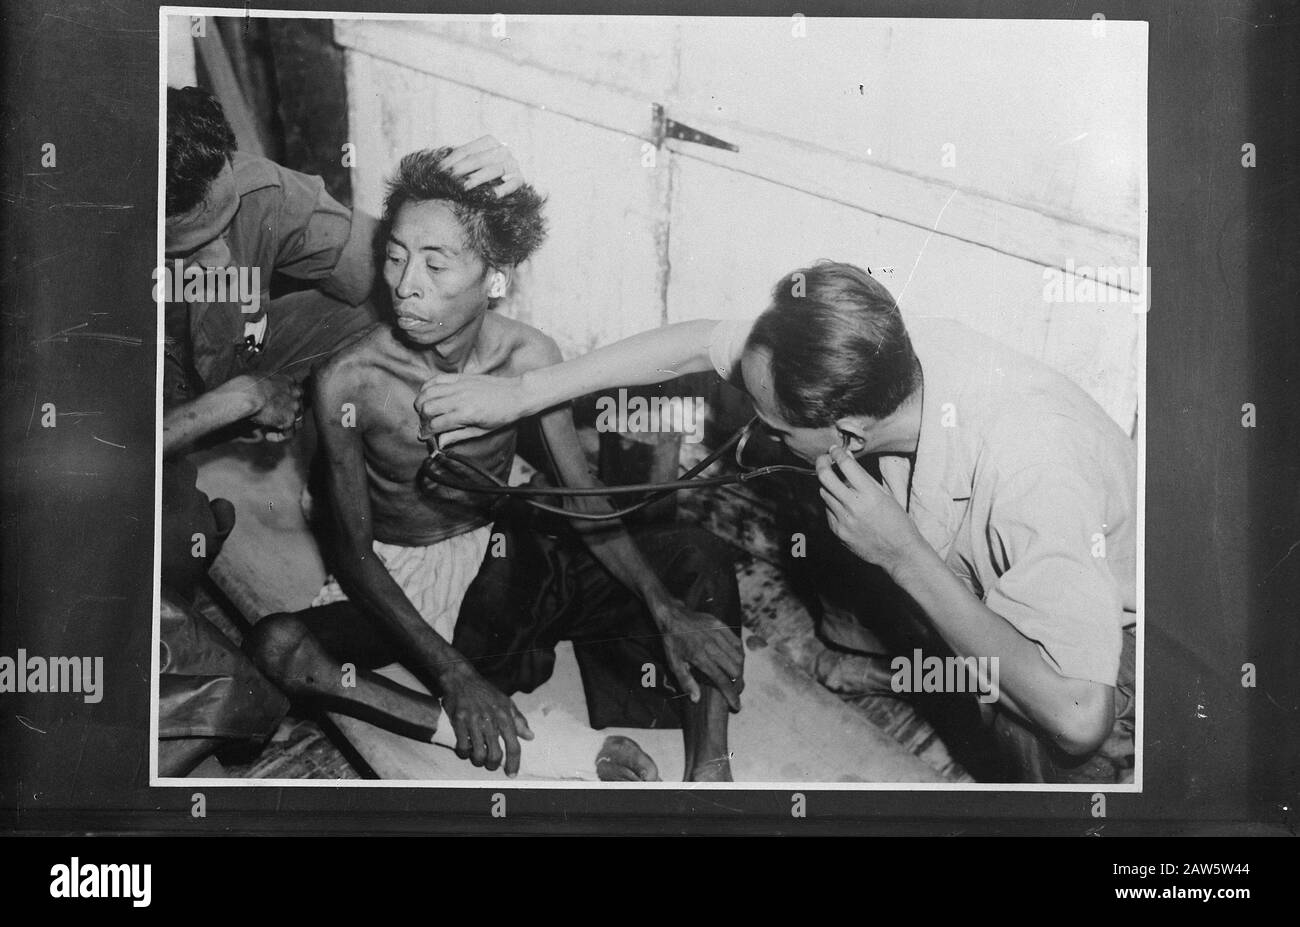 NICA hospital [an emaciated Indonesian man being examined by a doctor] Date: 1940-1945 Location: Indonesia Dutch East Indies Keywords: famine, natives, second world War nursing Stock Photo